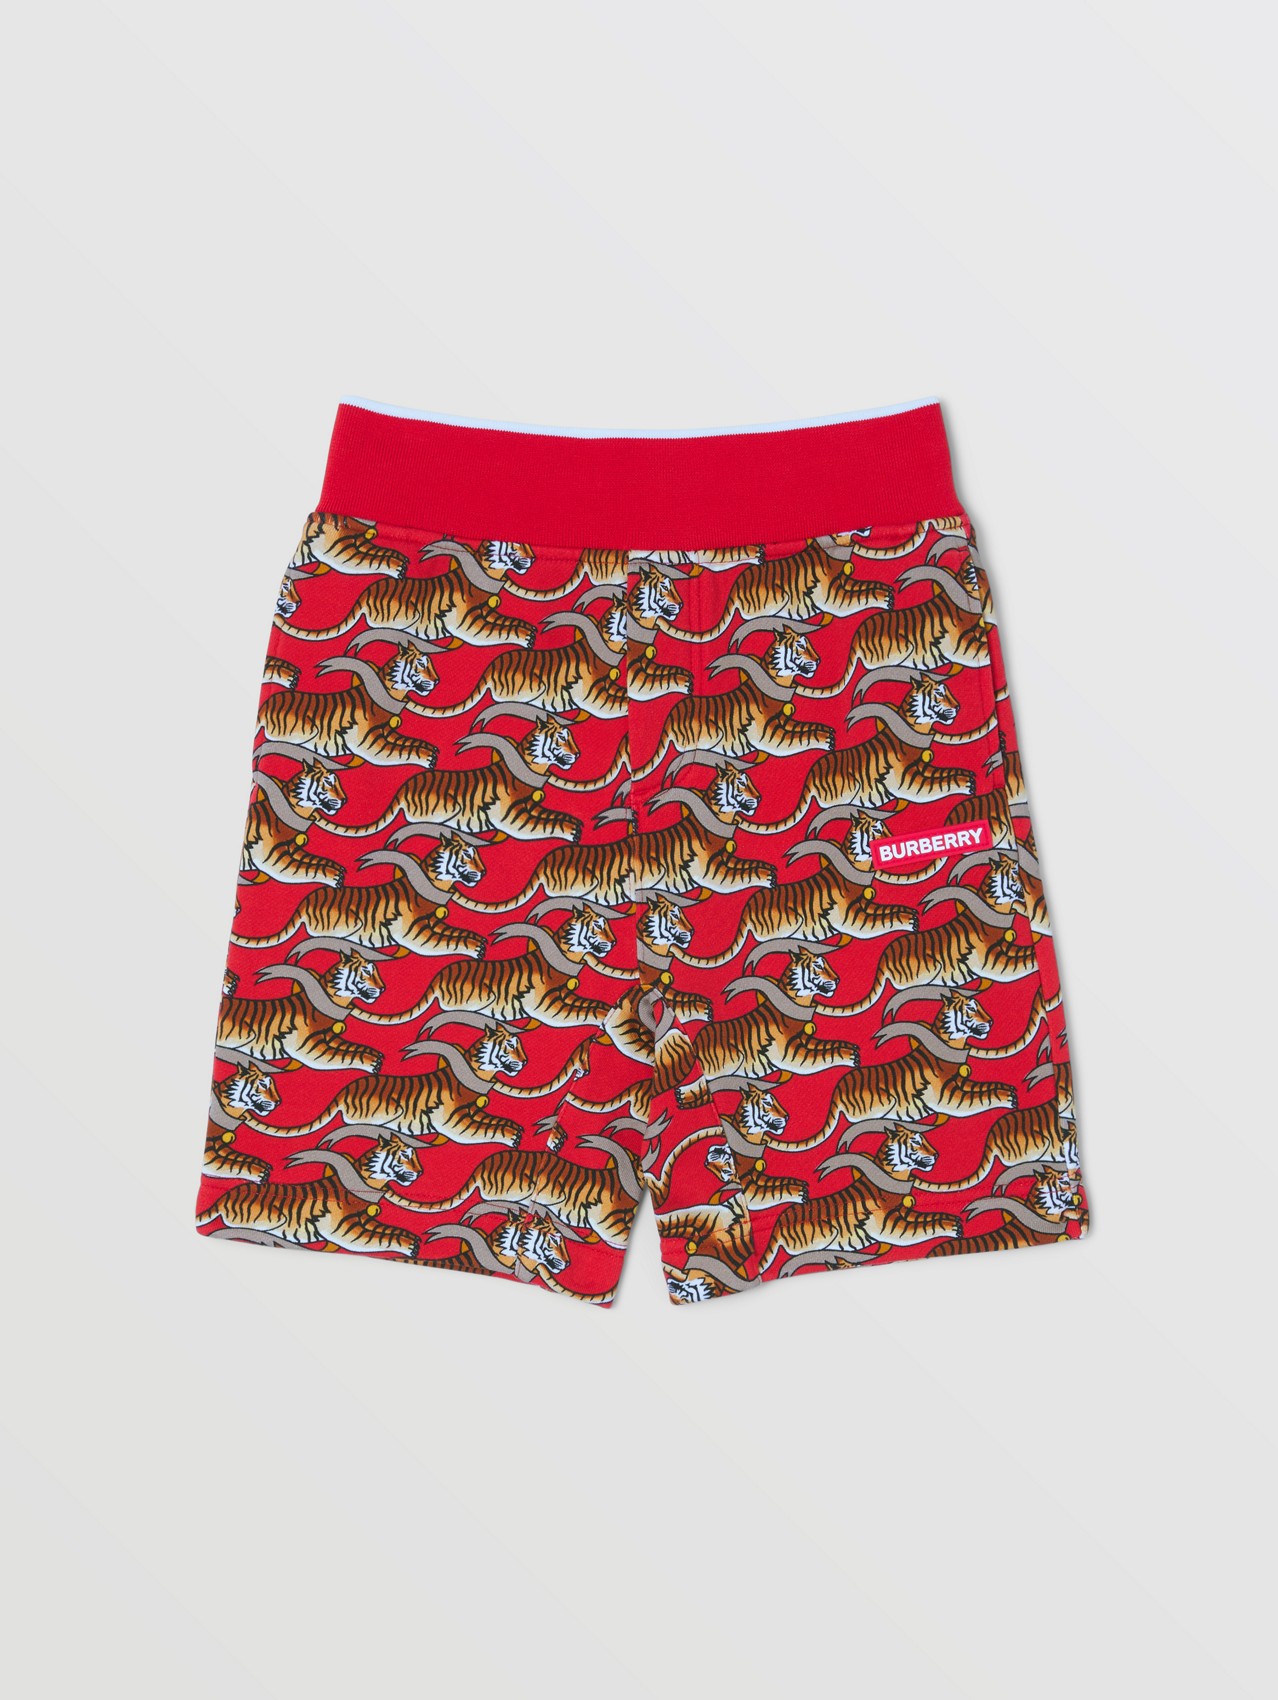 Tiger Print Cotton Shorts in Bright Red